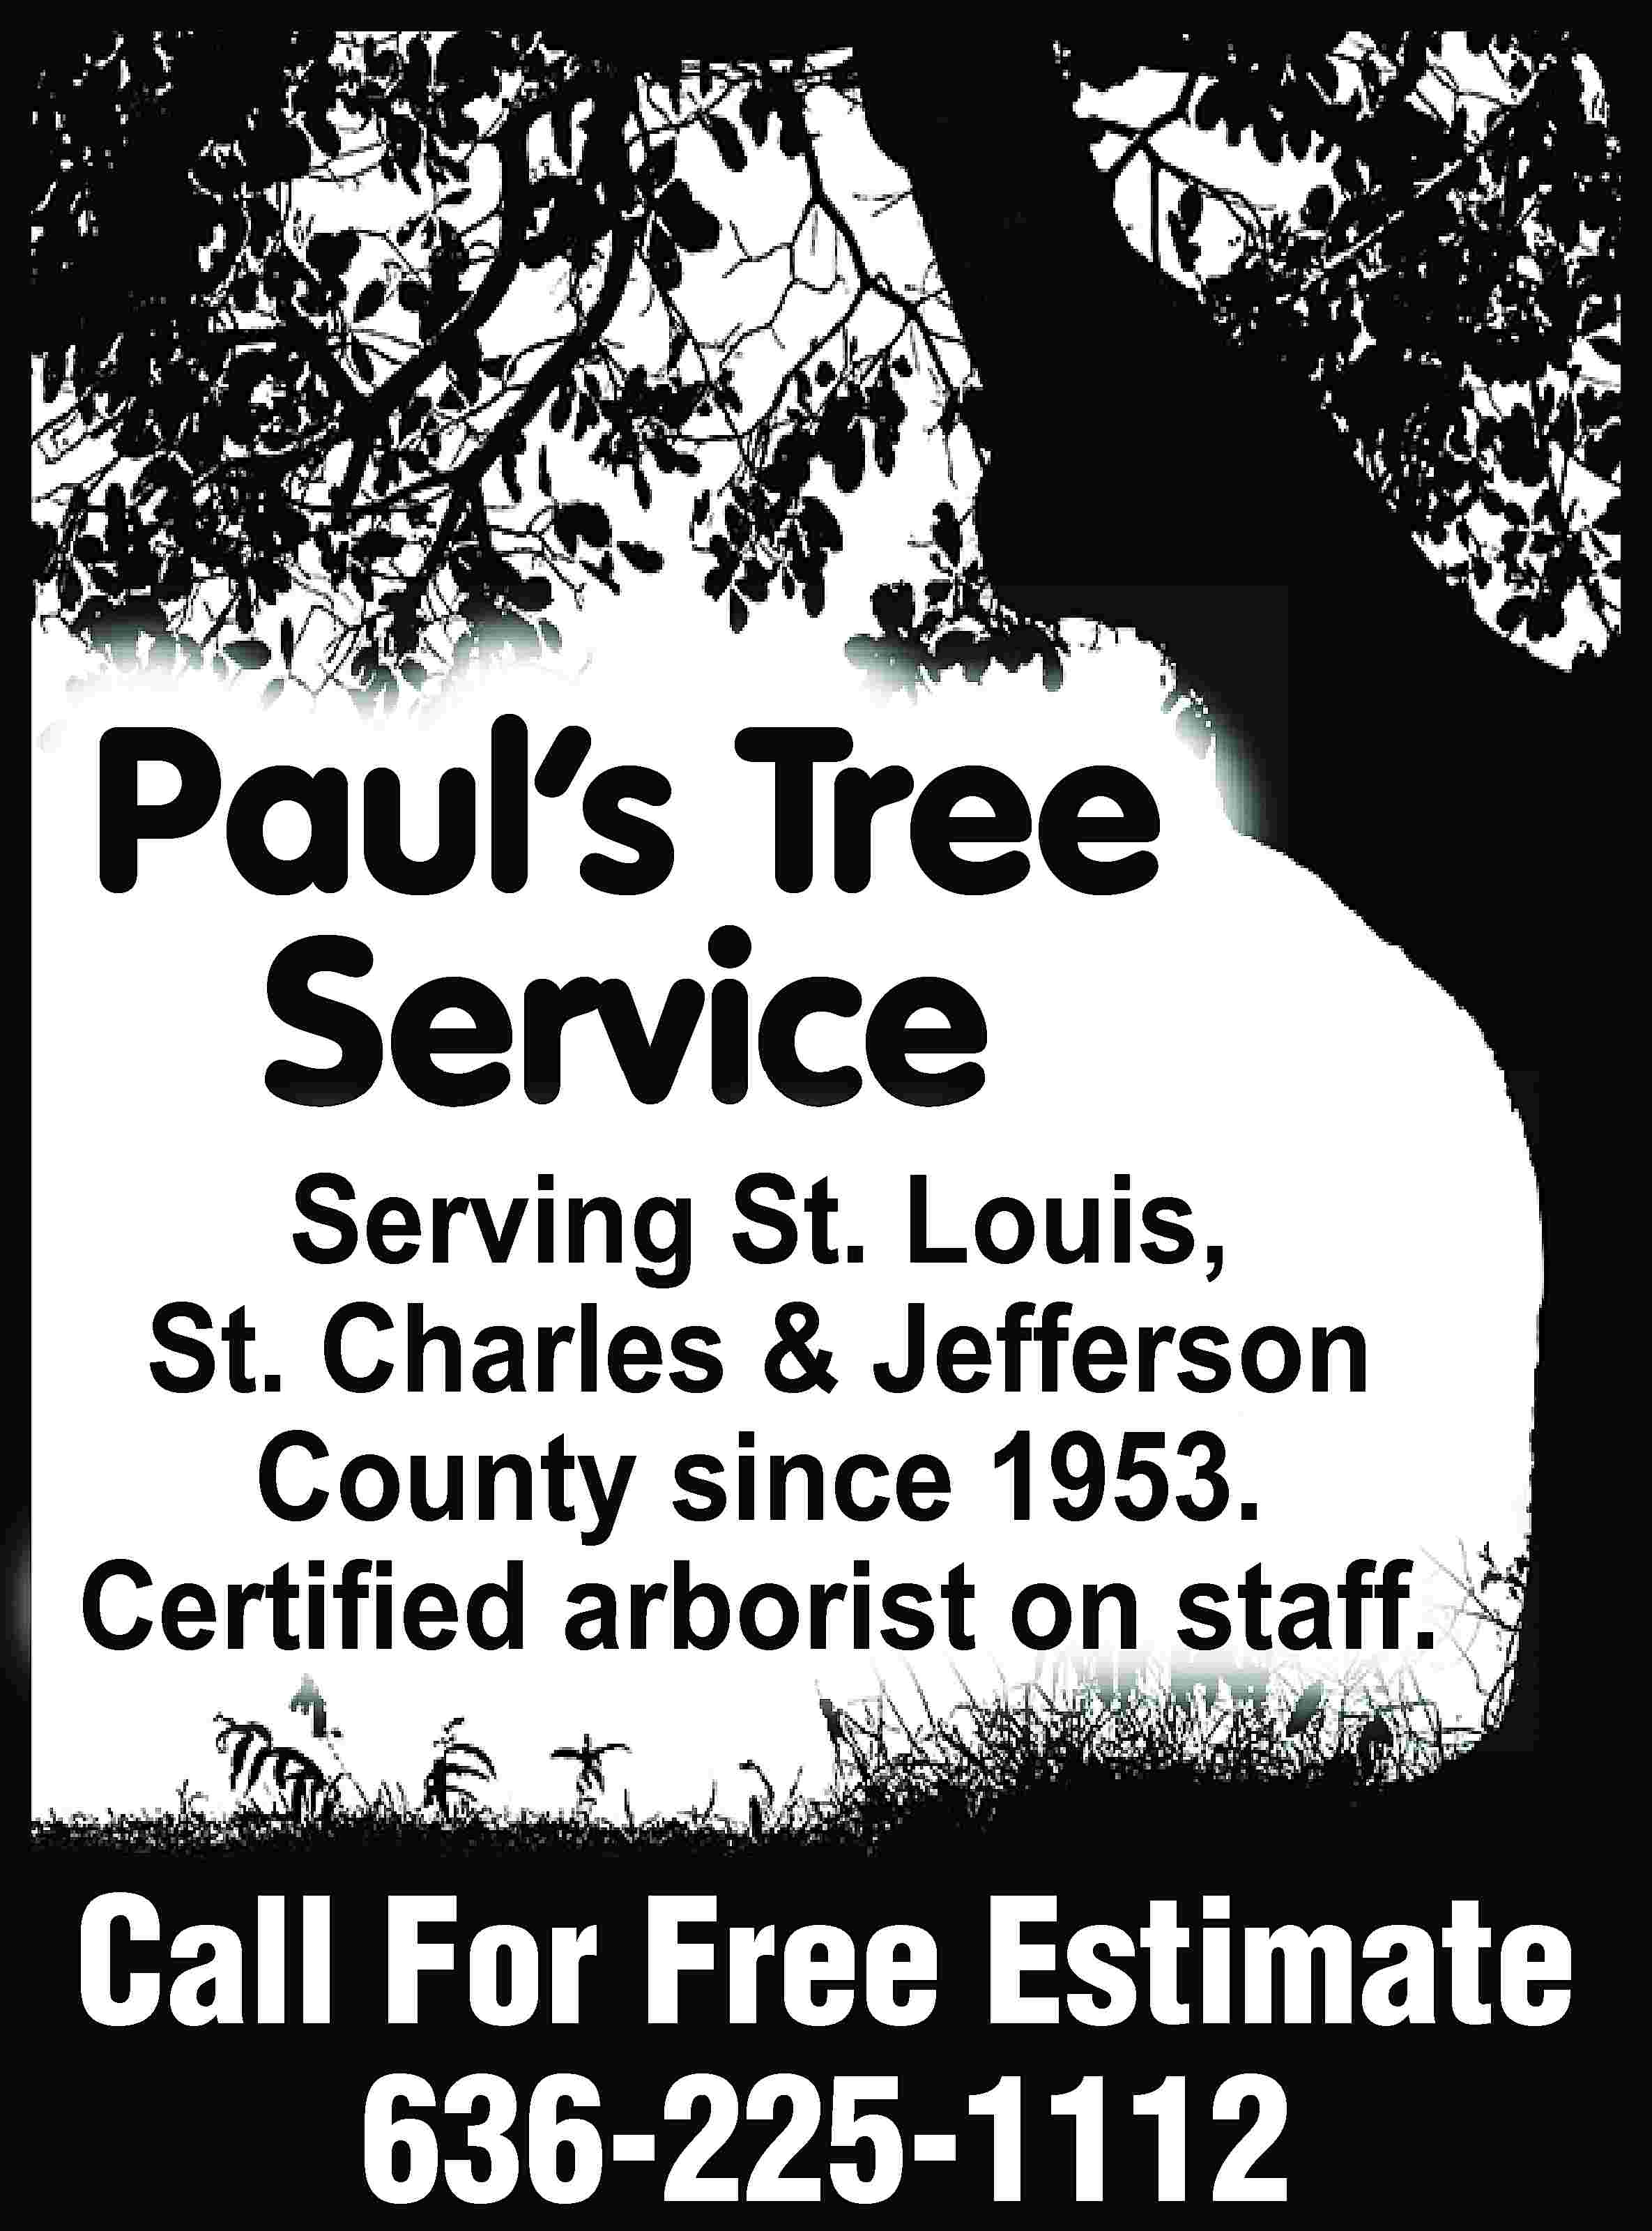 Paul’s Tree Service Serving St.  Paul’s Tree Service Serving St. Louis, St. Charles & Jefferson County since 1953. Certiﬁed arborist on staff. Call For Free Estimate 636-225-1112